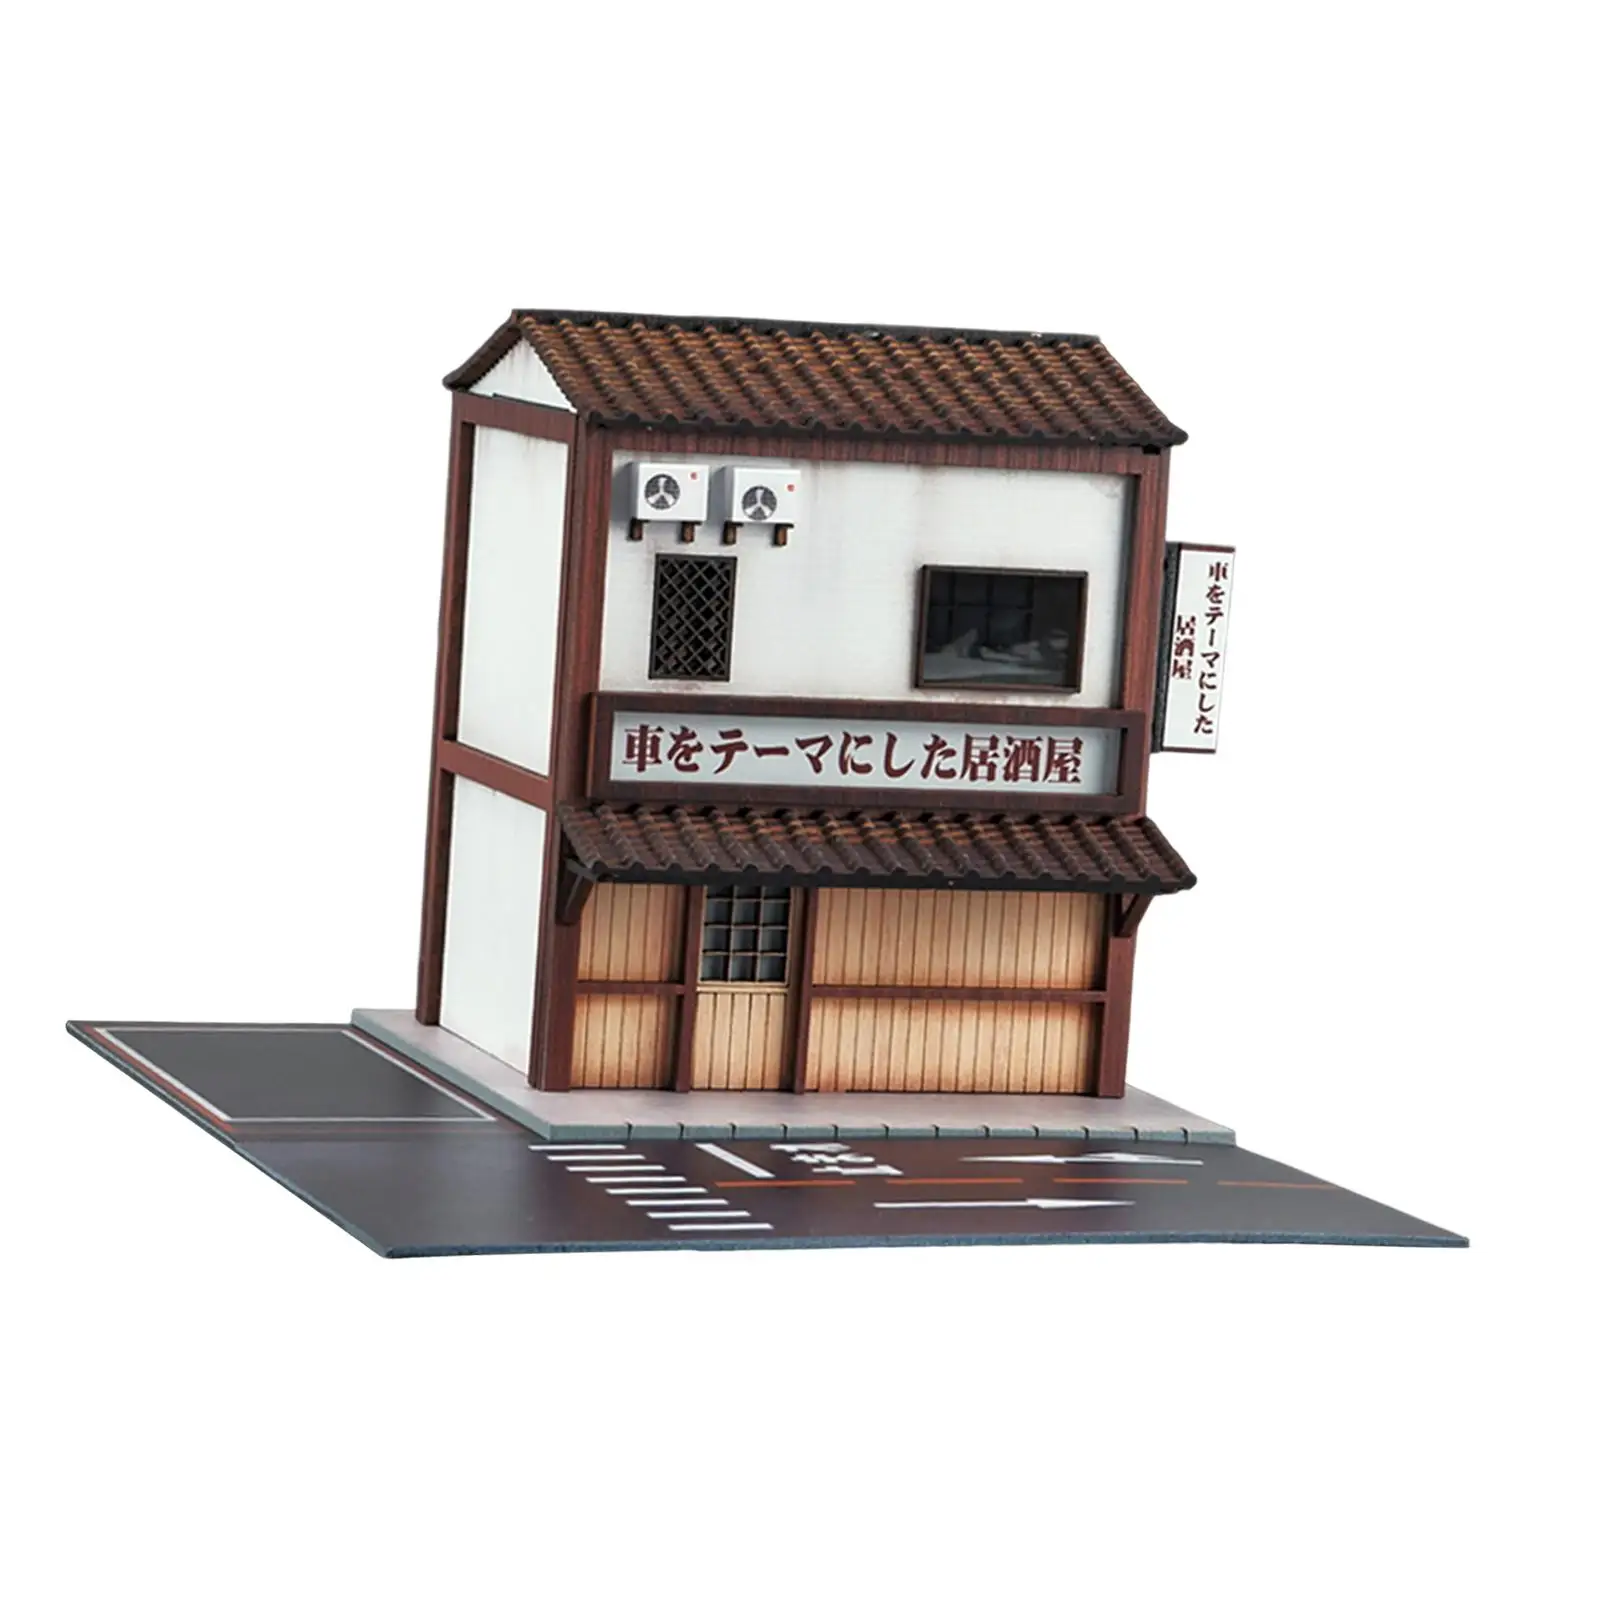 1:64 Parking Lots Model with Lights Miniature Scenes Decor Models Scenery for City DIY Model Diorama Sand Table Scenery Office